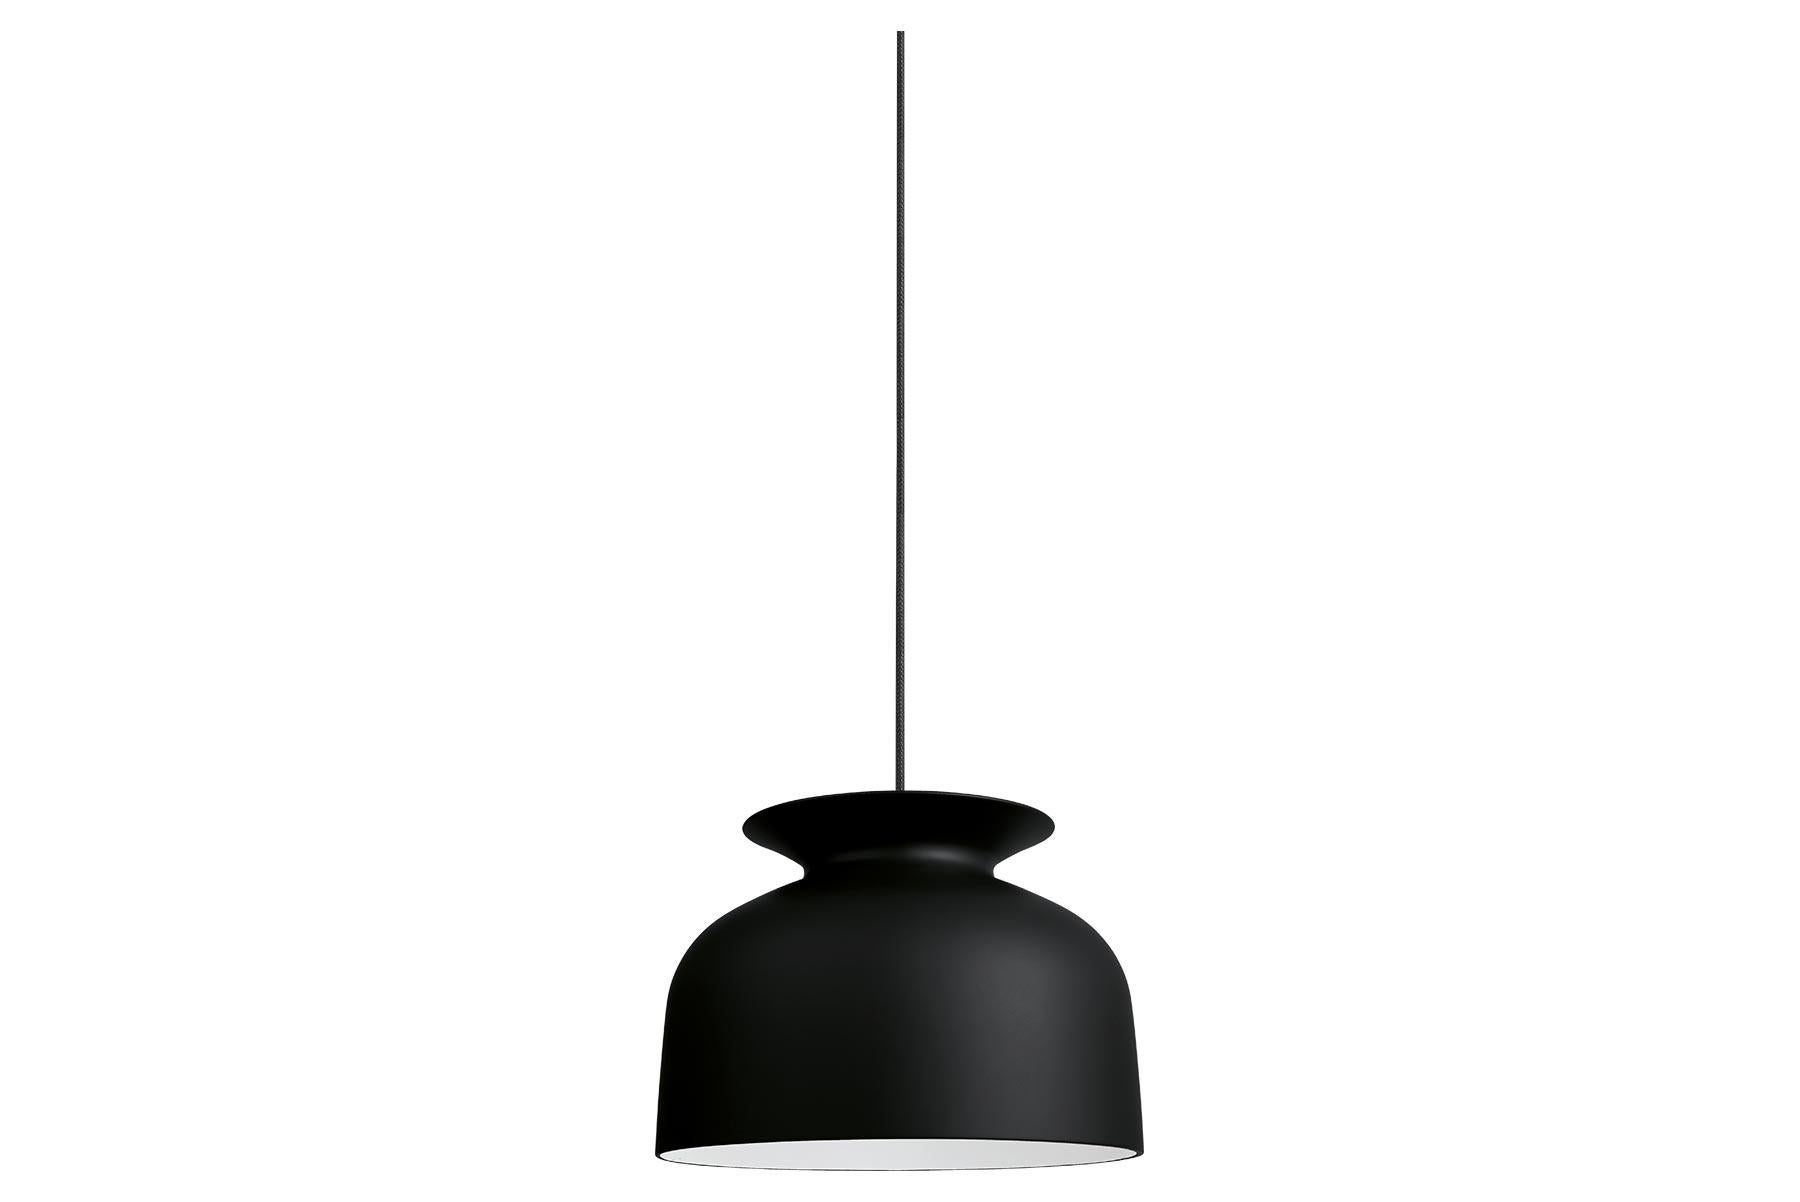 With its industrial, yet friendly look Ronde pendant is well-suited for both home decor and professional environments. Hang a few Ronde pendants in the kitchen, place the smallest Ronde on each side of the bed or use one of the larger Ronde pendants